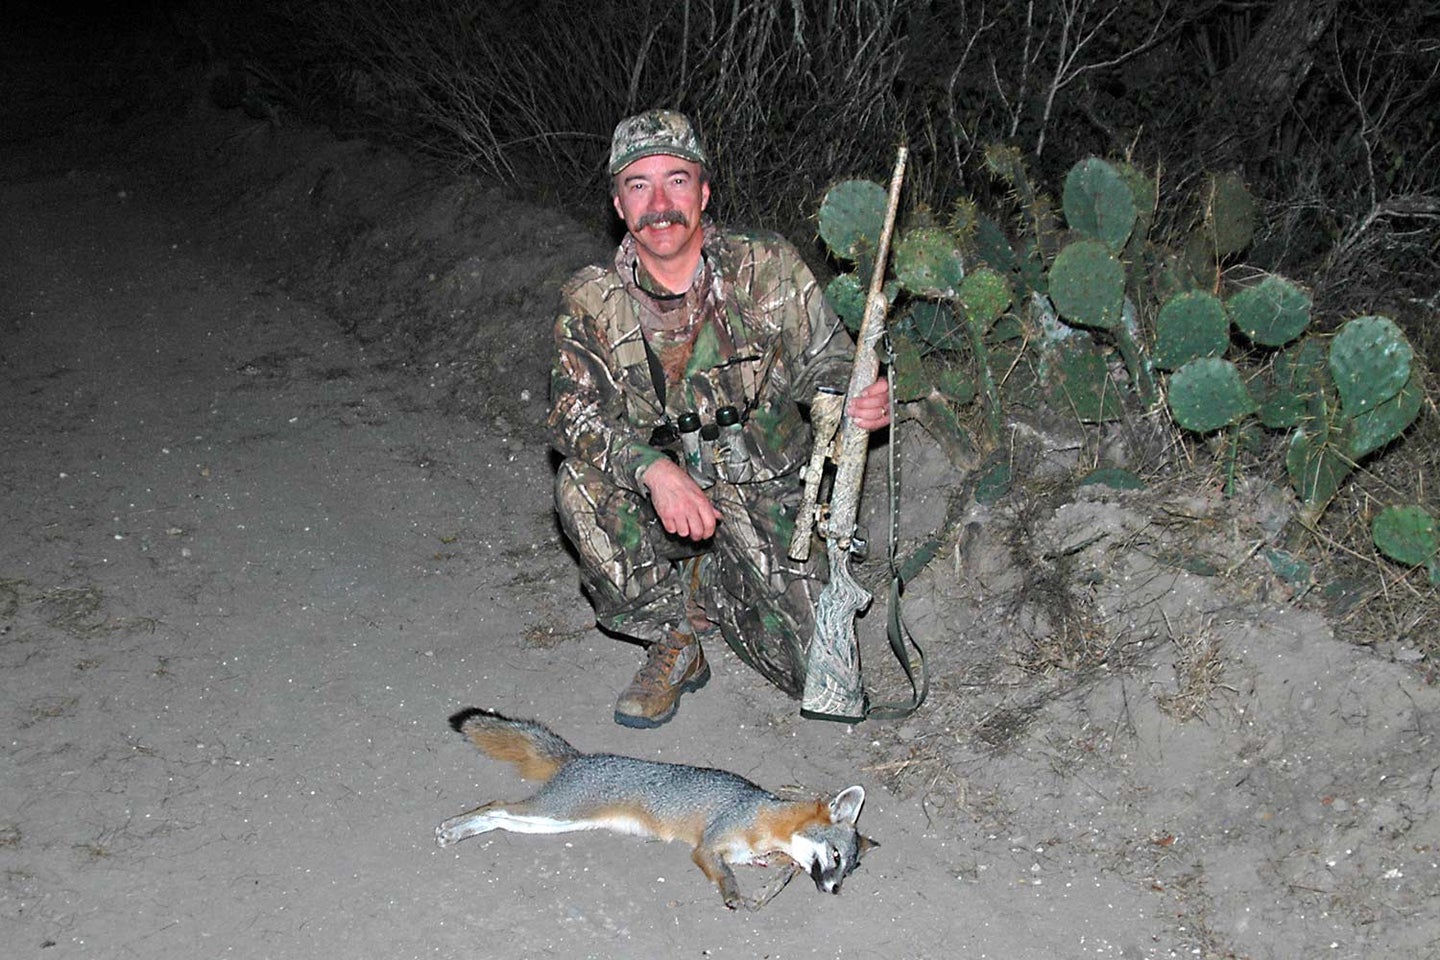 Mike Dickerson collected this gray fox in Texas using a Savage rifle chambered for the round.